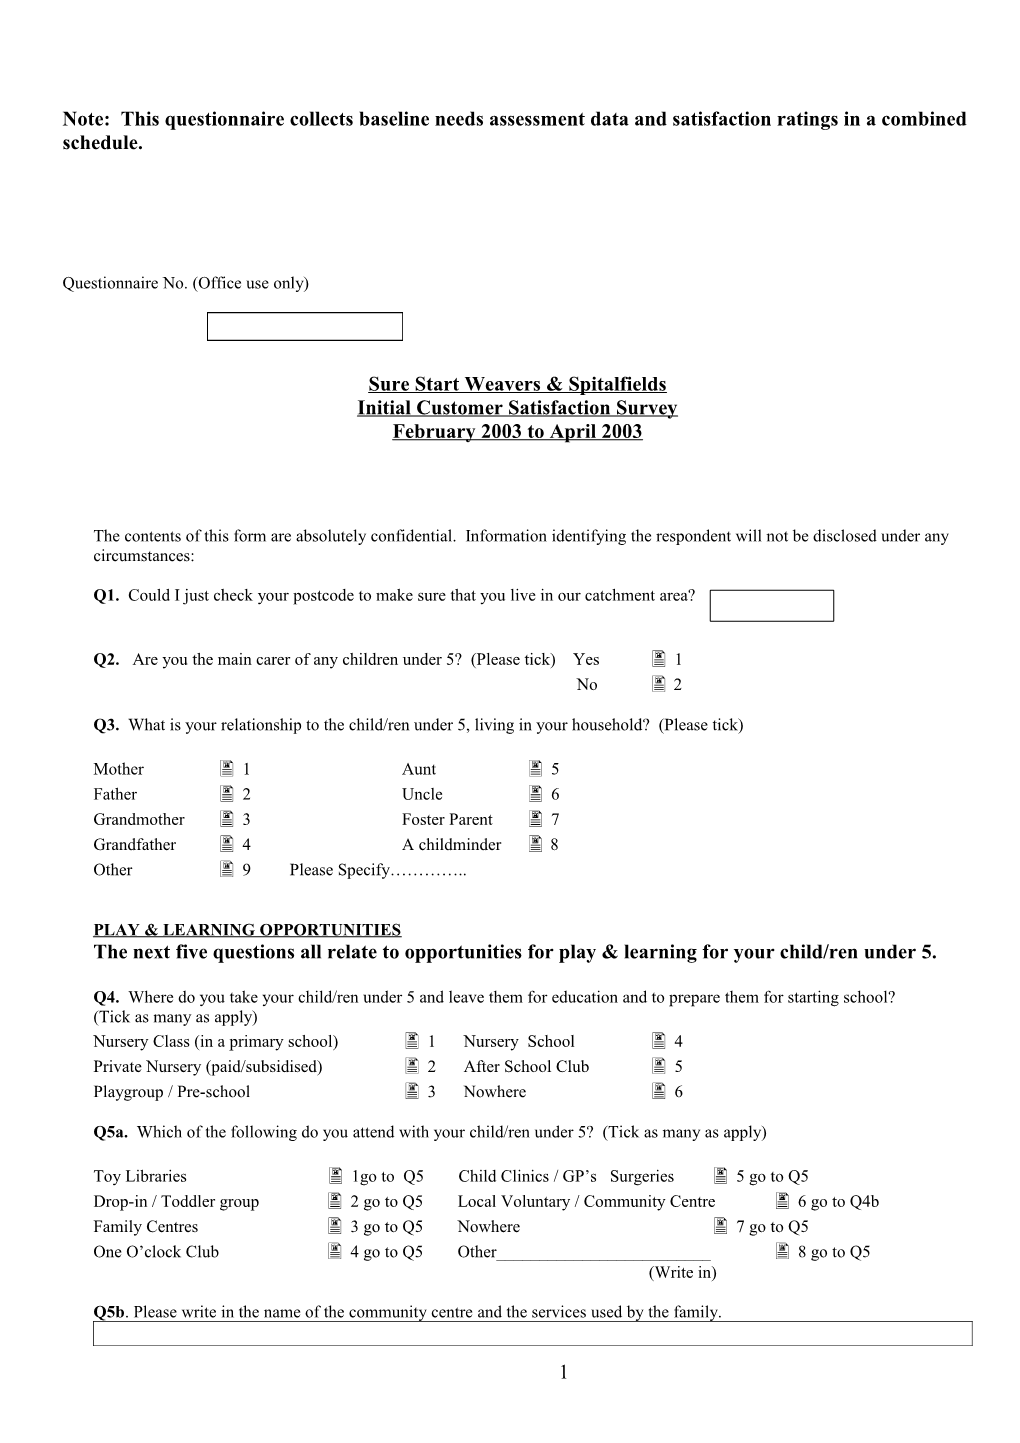 Note: This Questionnaire Collects Baseline Needs Assessment Data and Satisfaction Ratings